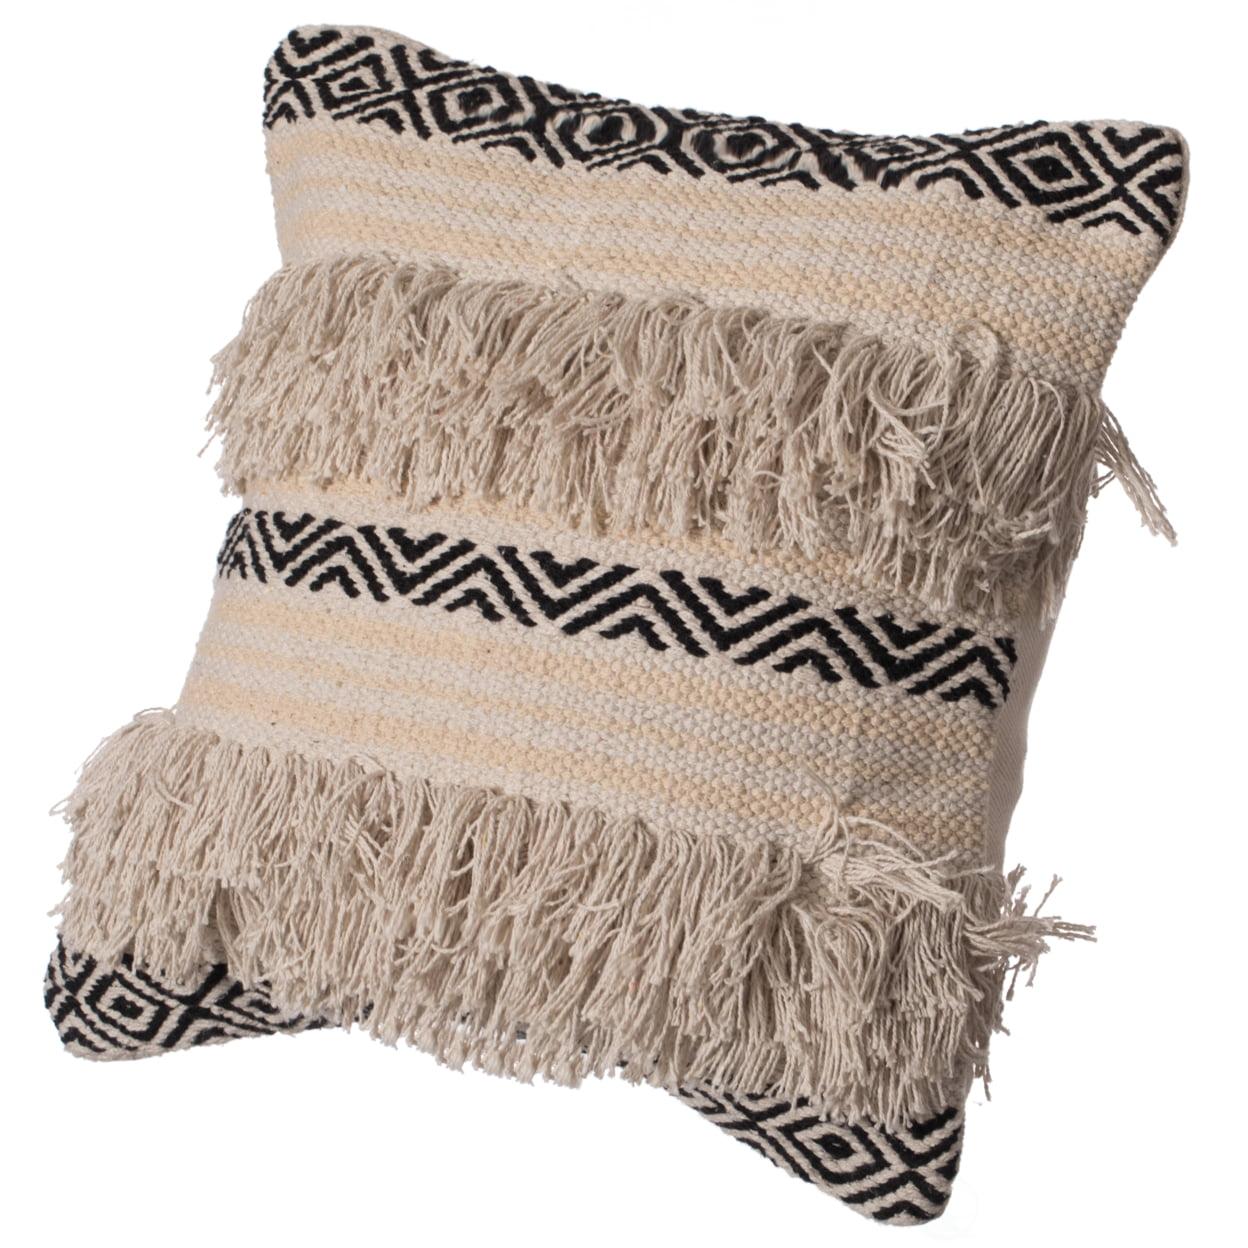 Bohemian Chic 16" Handwoven Cotton Pillow Cover with Fringe Detail